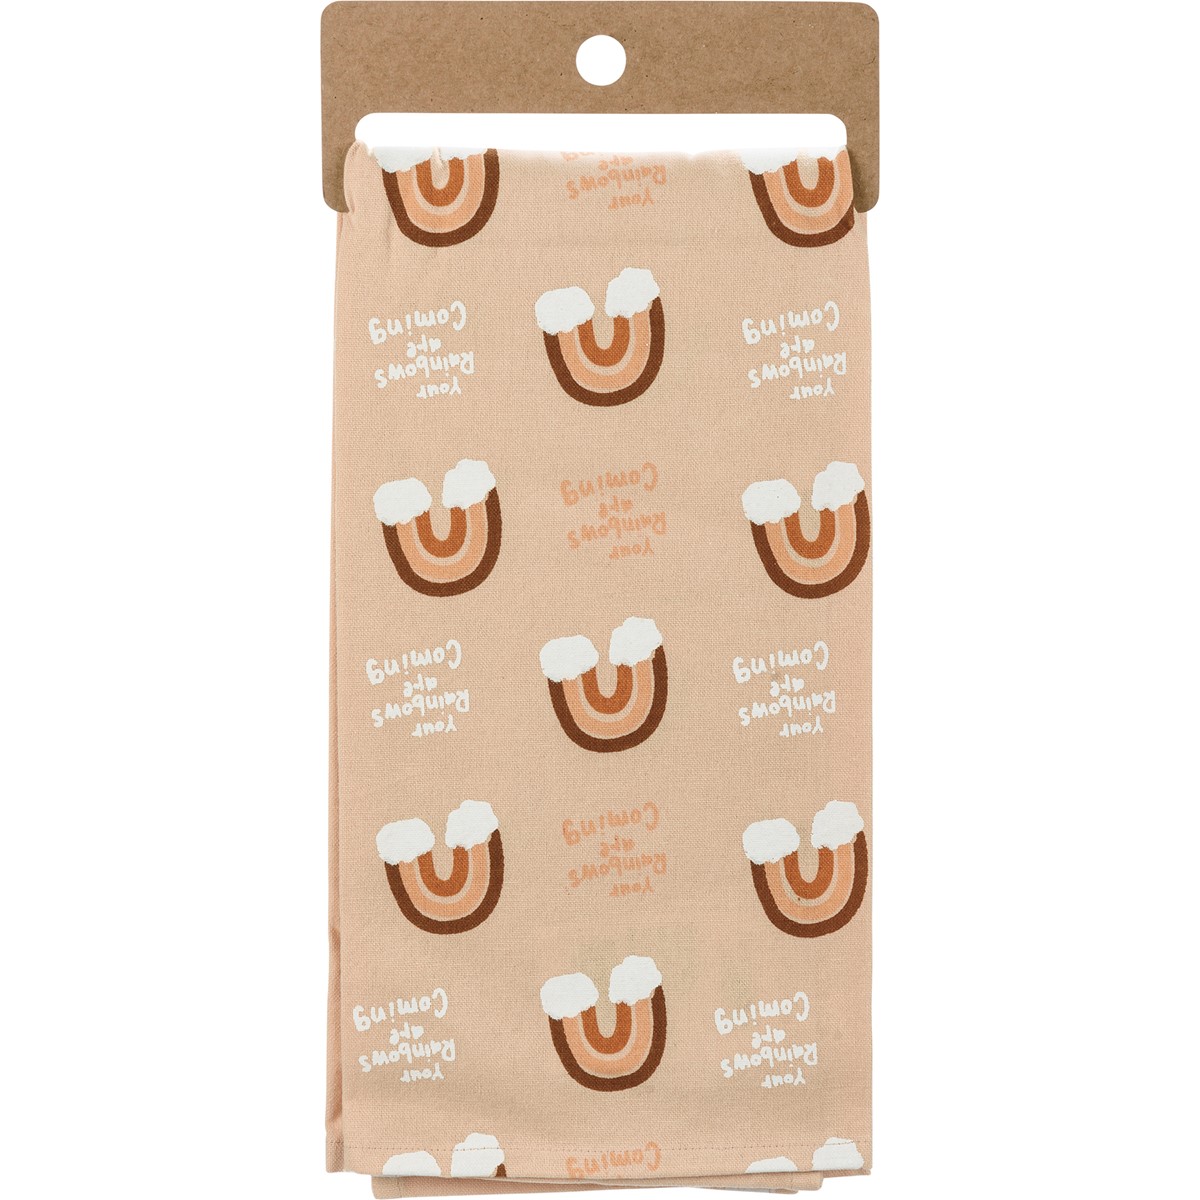 Your Rainbows Are Coming Kitchen Towel - Cotton